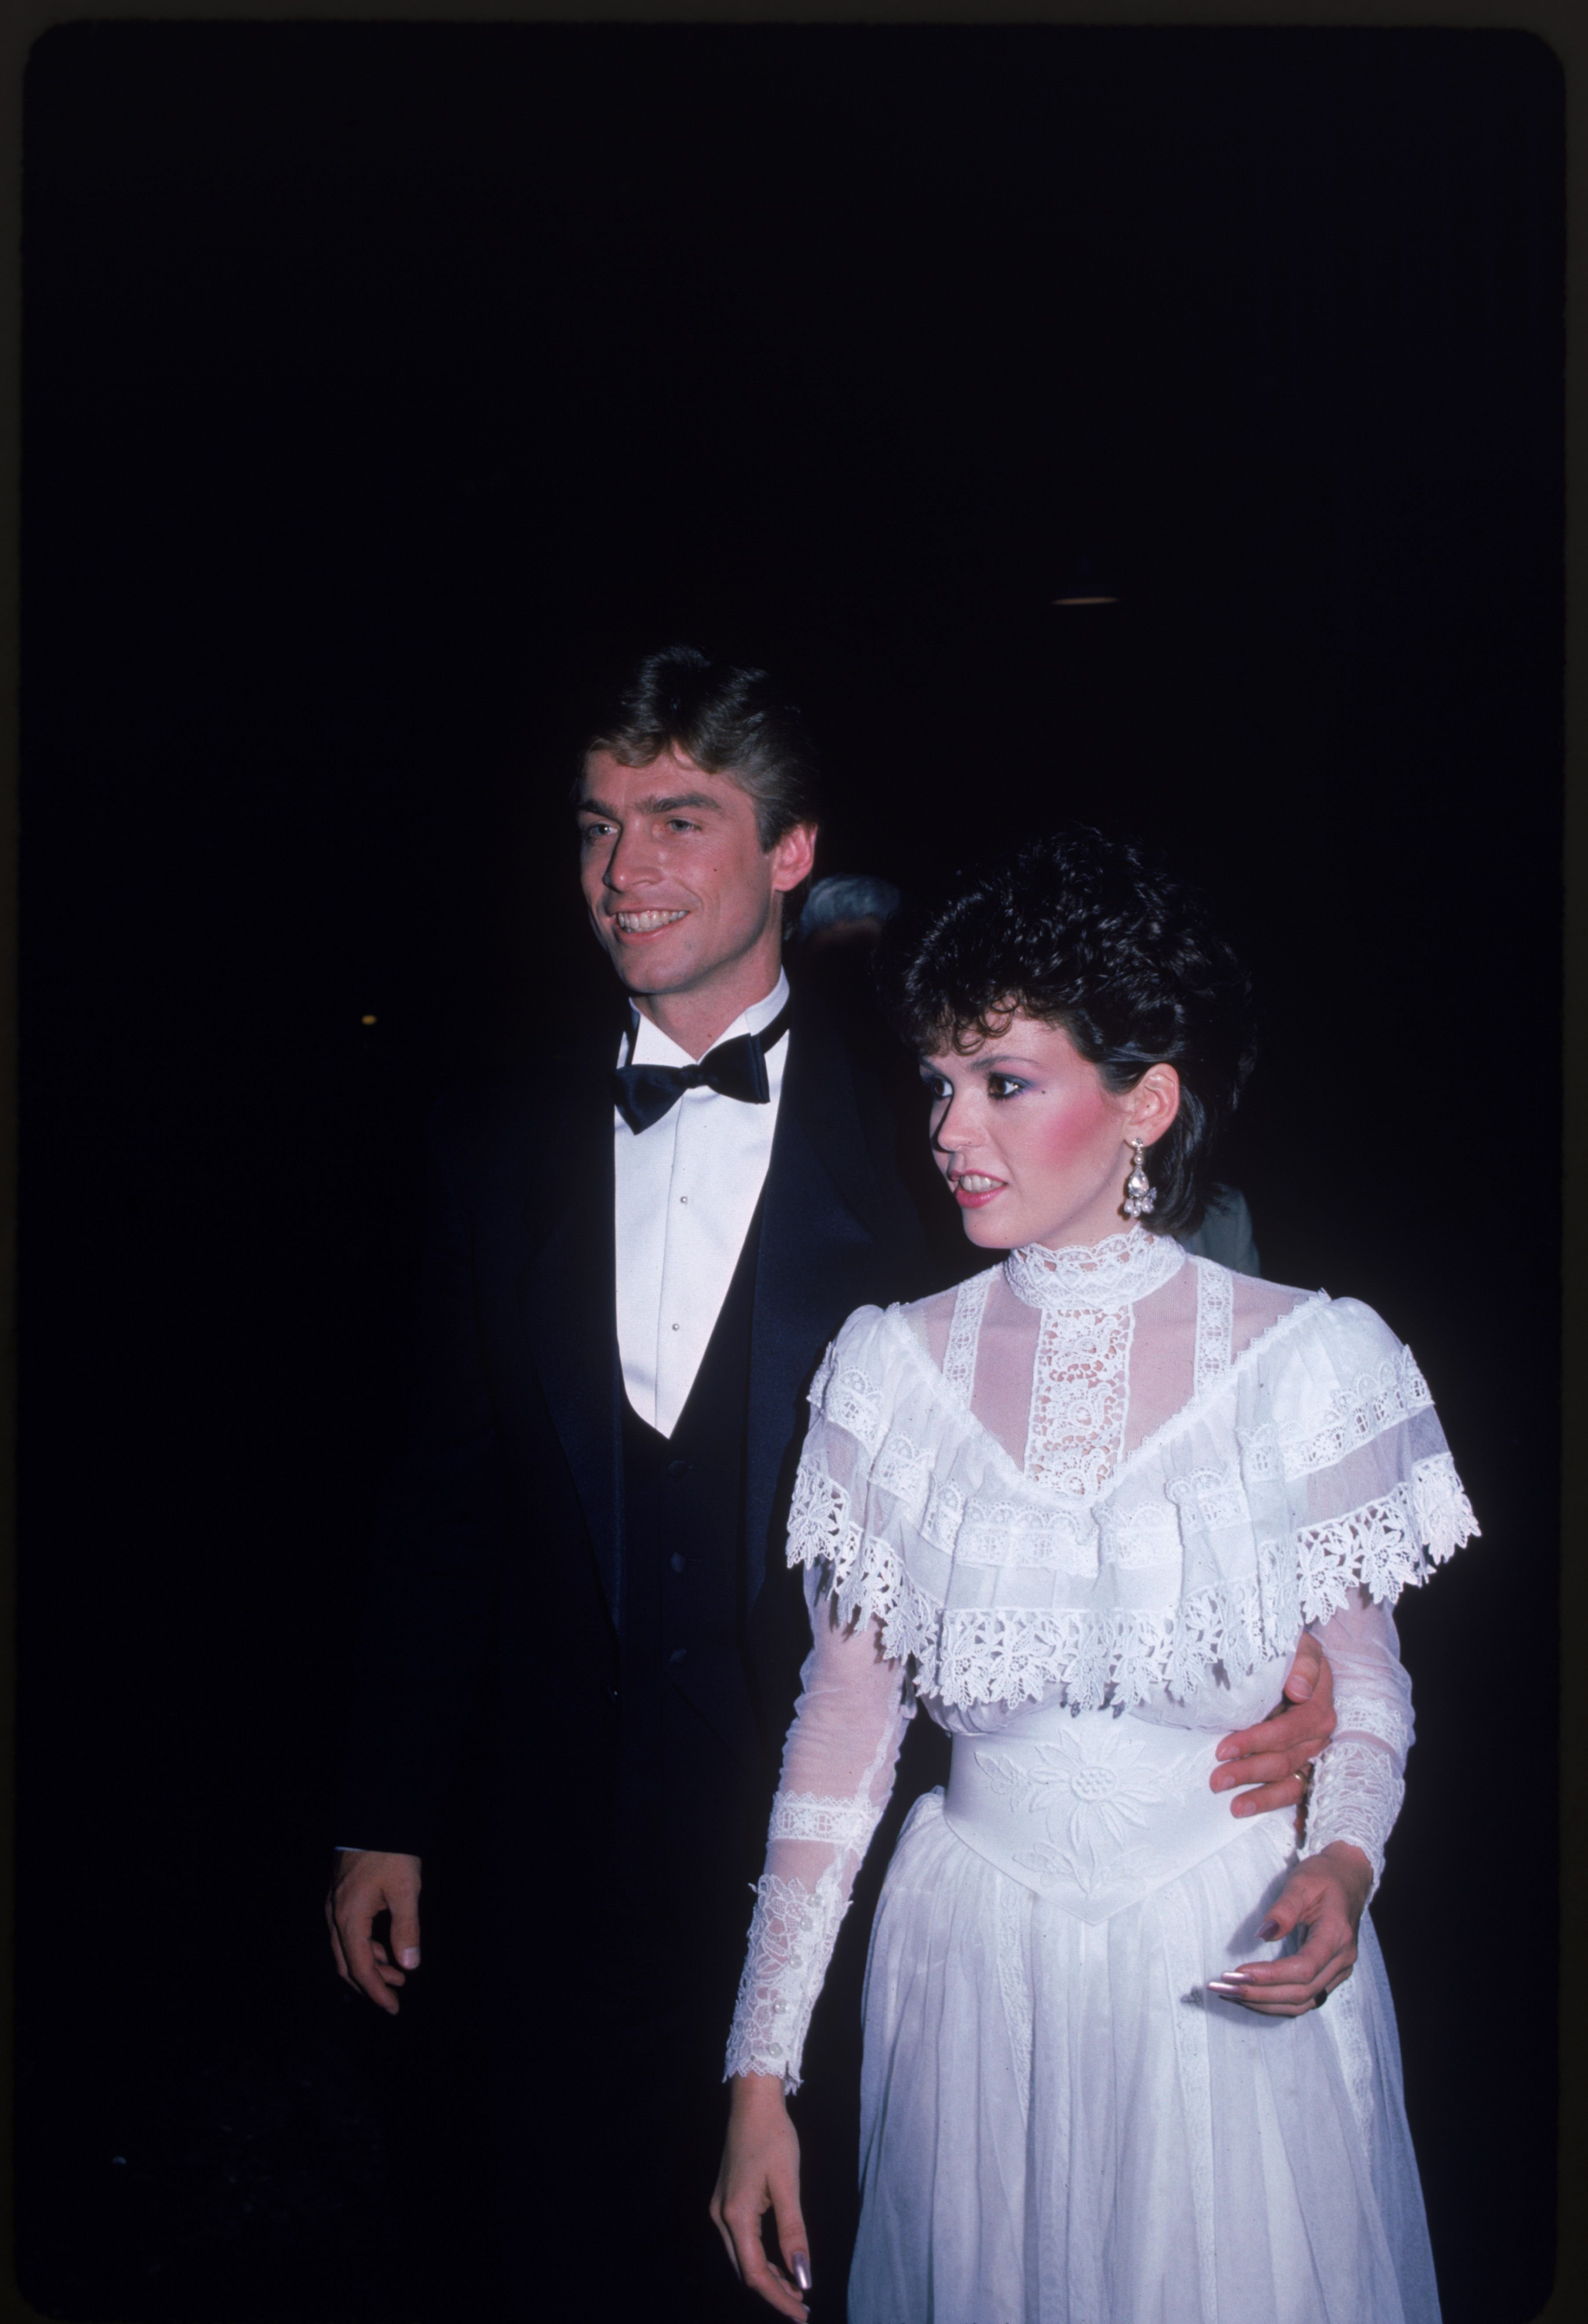 Marie Osmond and Steve Craig on May 01, 1984 | Photo: John Paschal/The LIFE Picture Collection/Getty Images